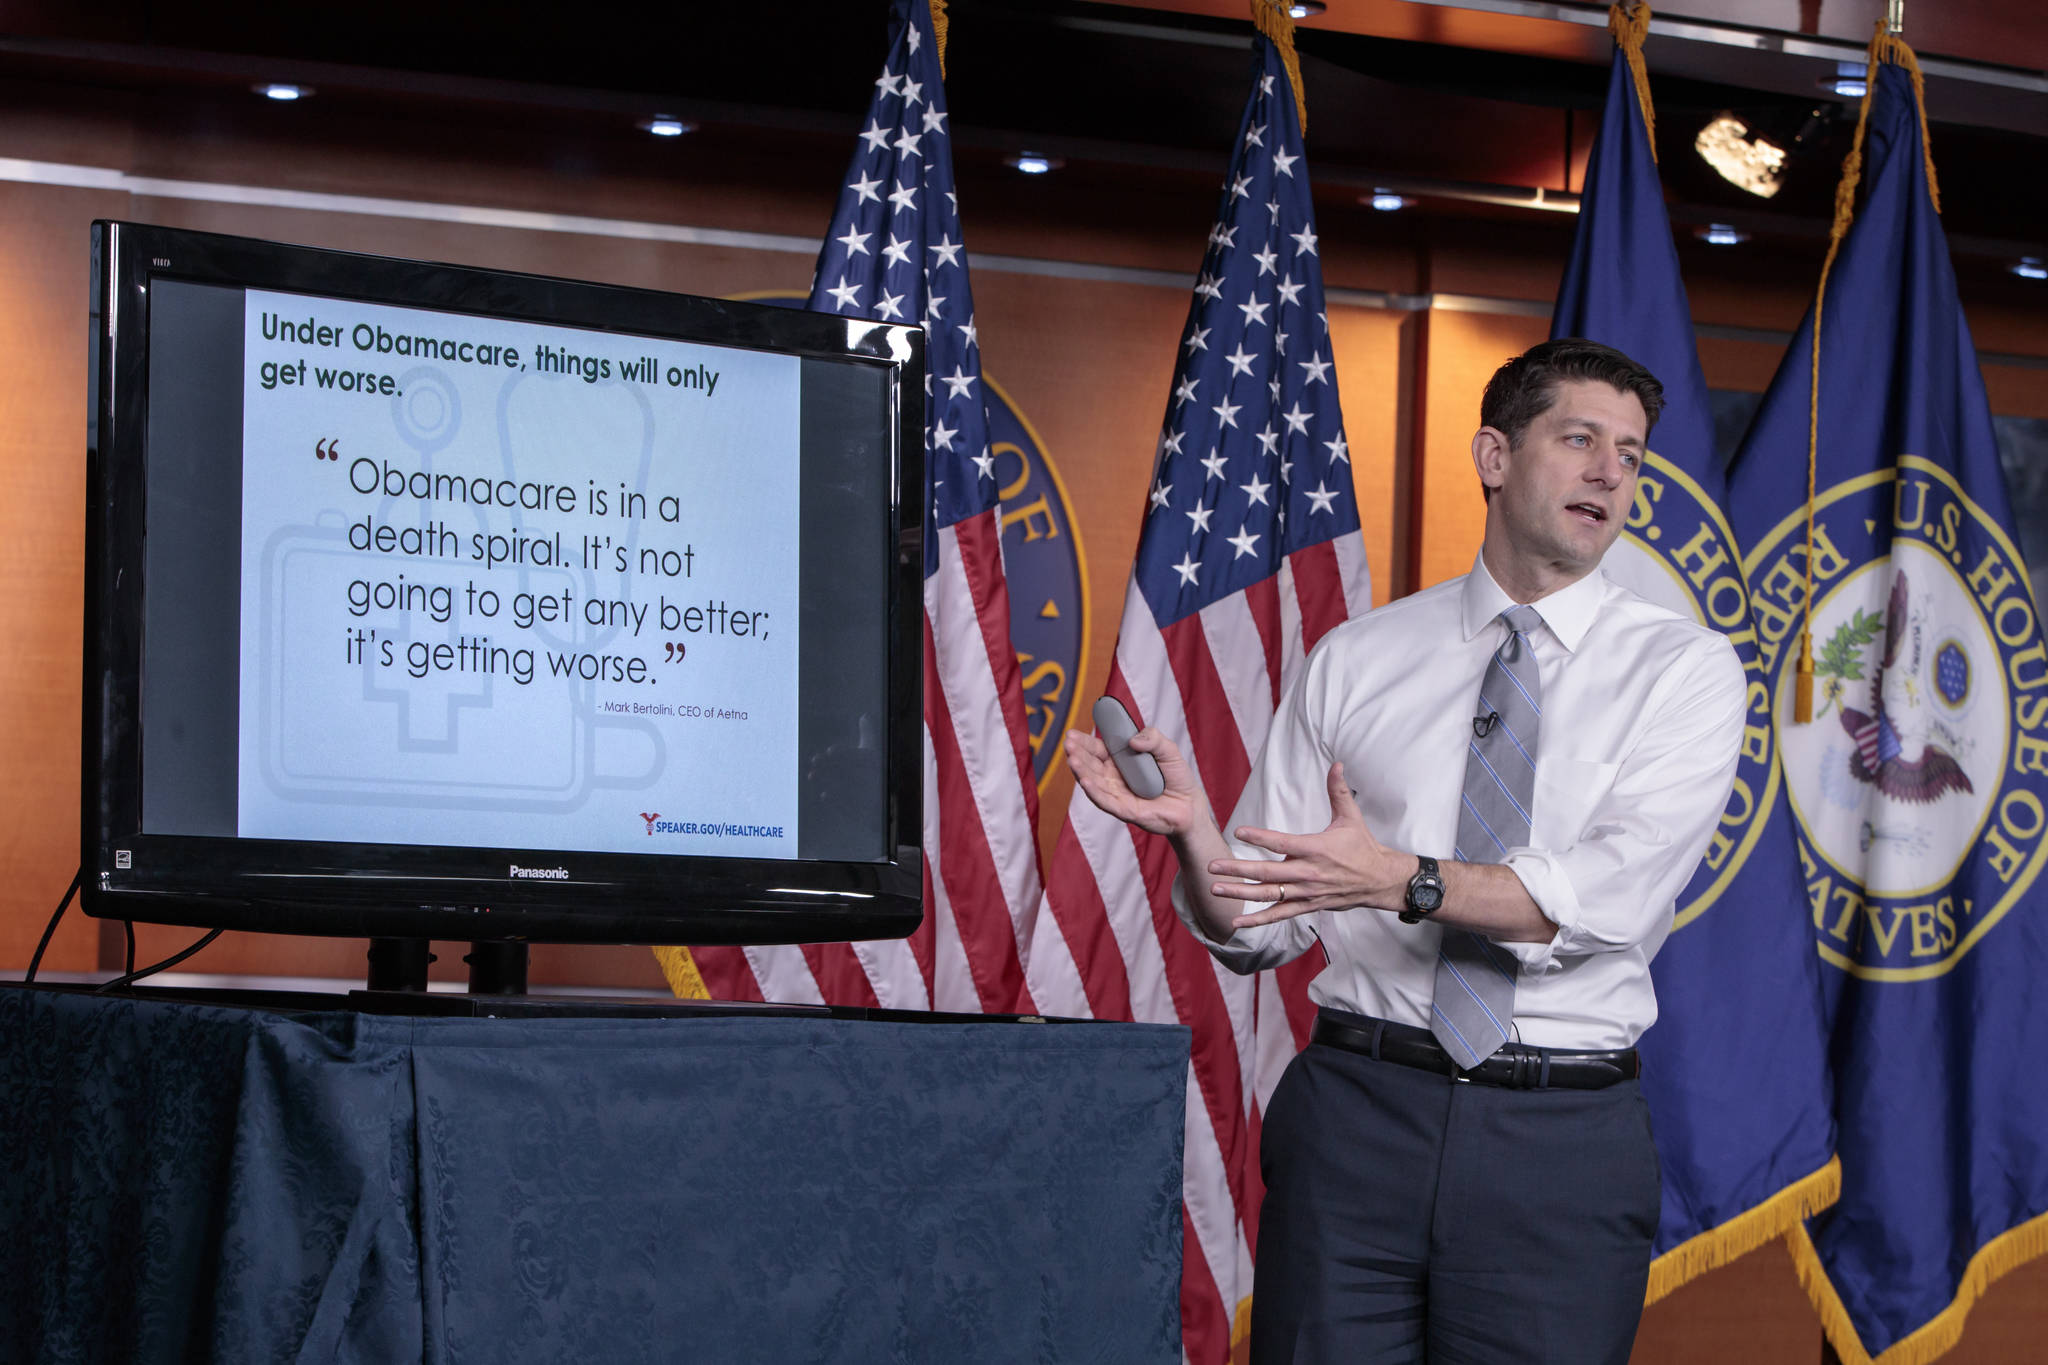 In this March 9, 2017 photo, House Speaker Paul Ryan of Wisconsin uses charts and graphs to make his case for the GOP’s long-awaited plan to repeal and replace the Affordable Care Act during a news conference on Capitol Hill in Washington. Republicans pushing a plan to dismantle Barack Obama’s health care law are bracing for a Congressional Budget Office analysis widely expected to conclude that fewer Americans will have health coverage under the proposal, despite President Donald Trump’s promise of “insurance for everybody.” (J. Scott Applewhite | The Associated Press)